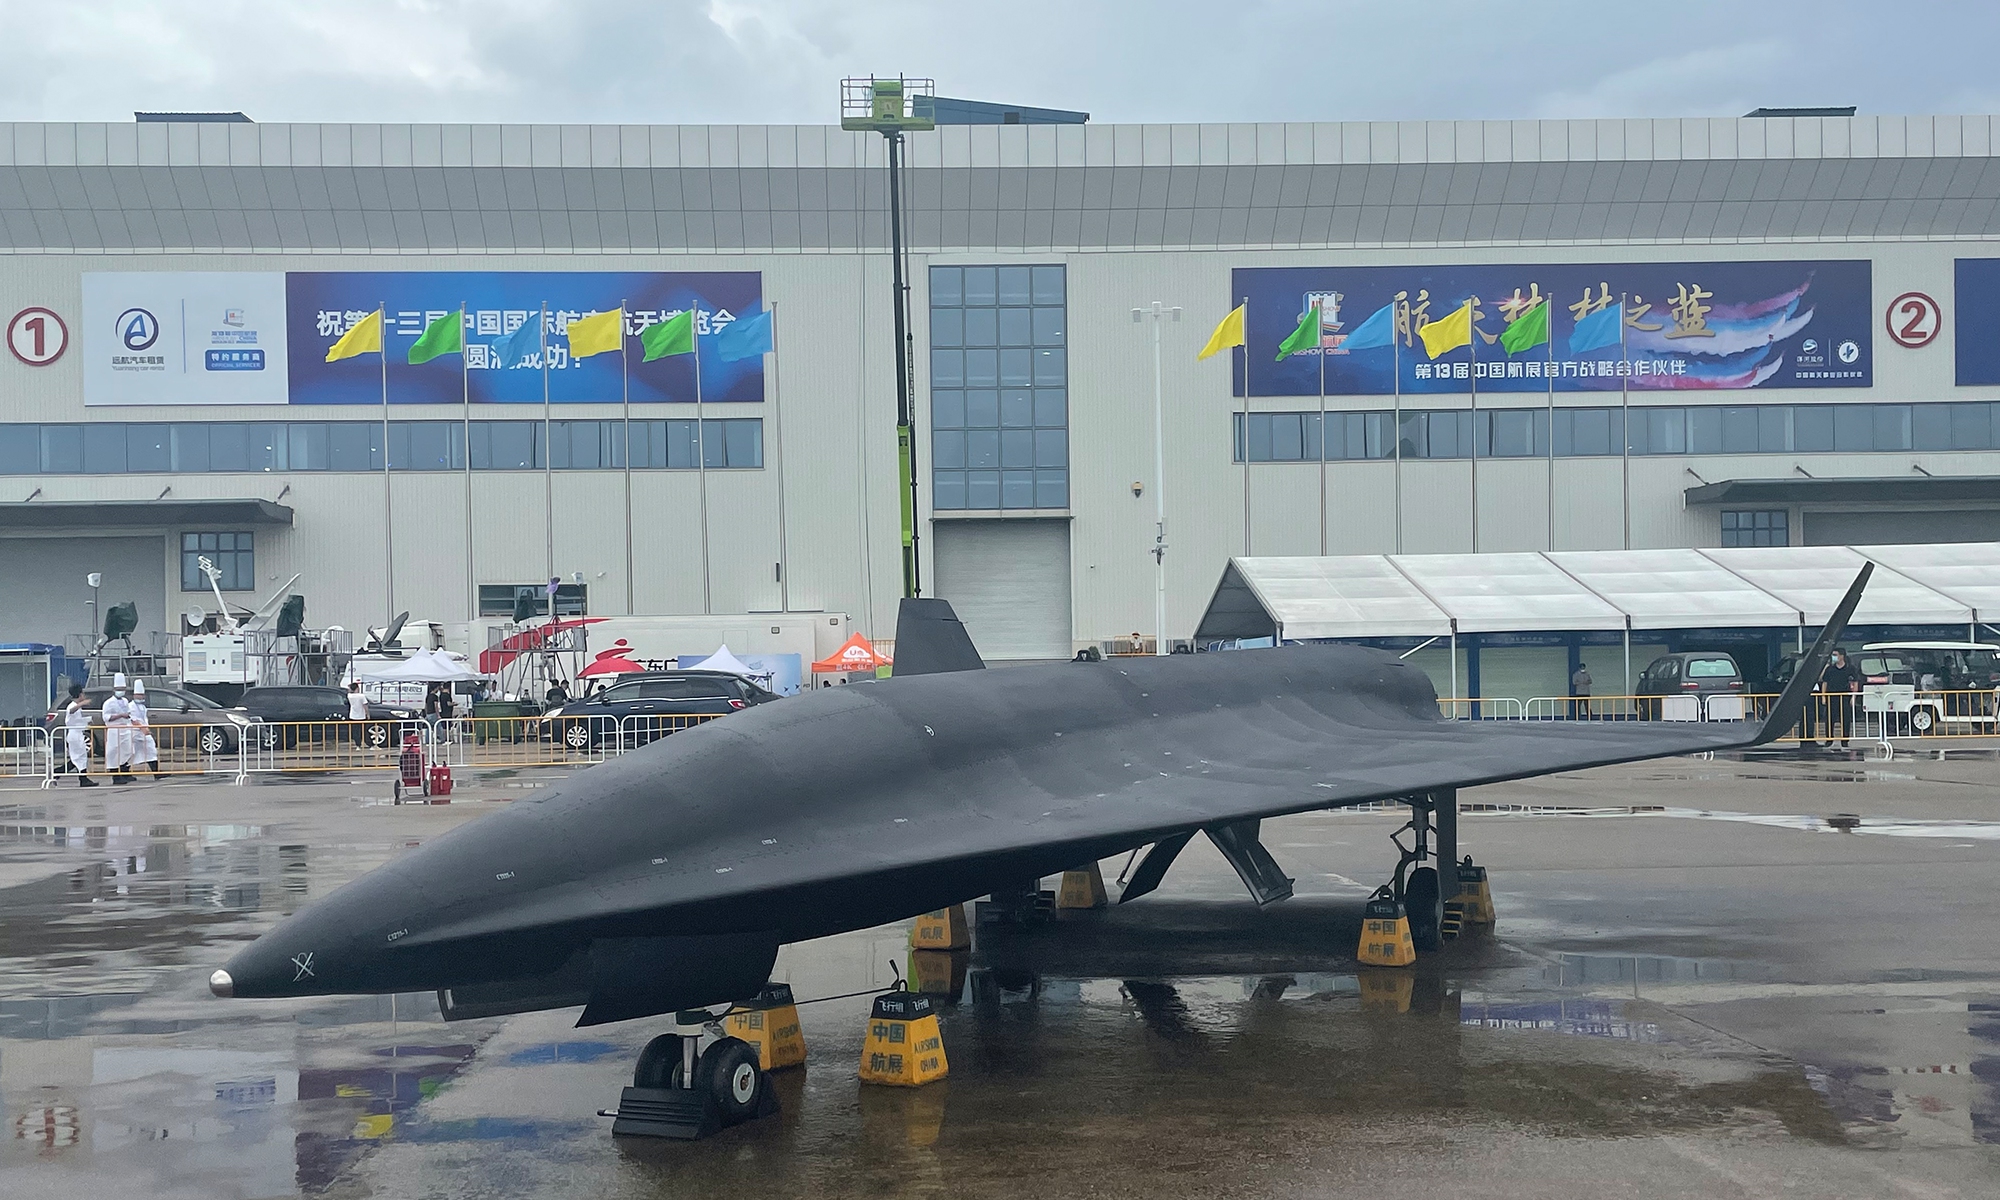 A preview of the Zhuhai airshow Global Times